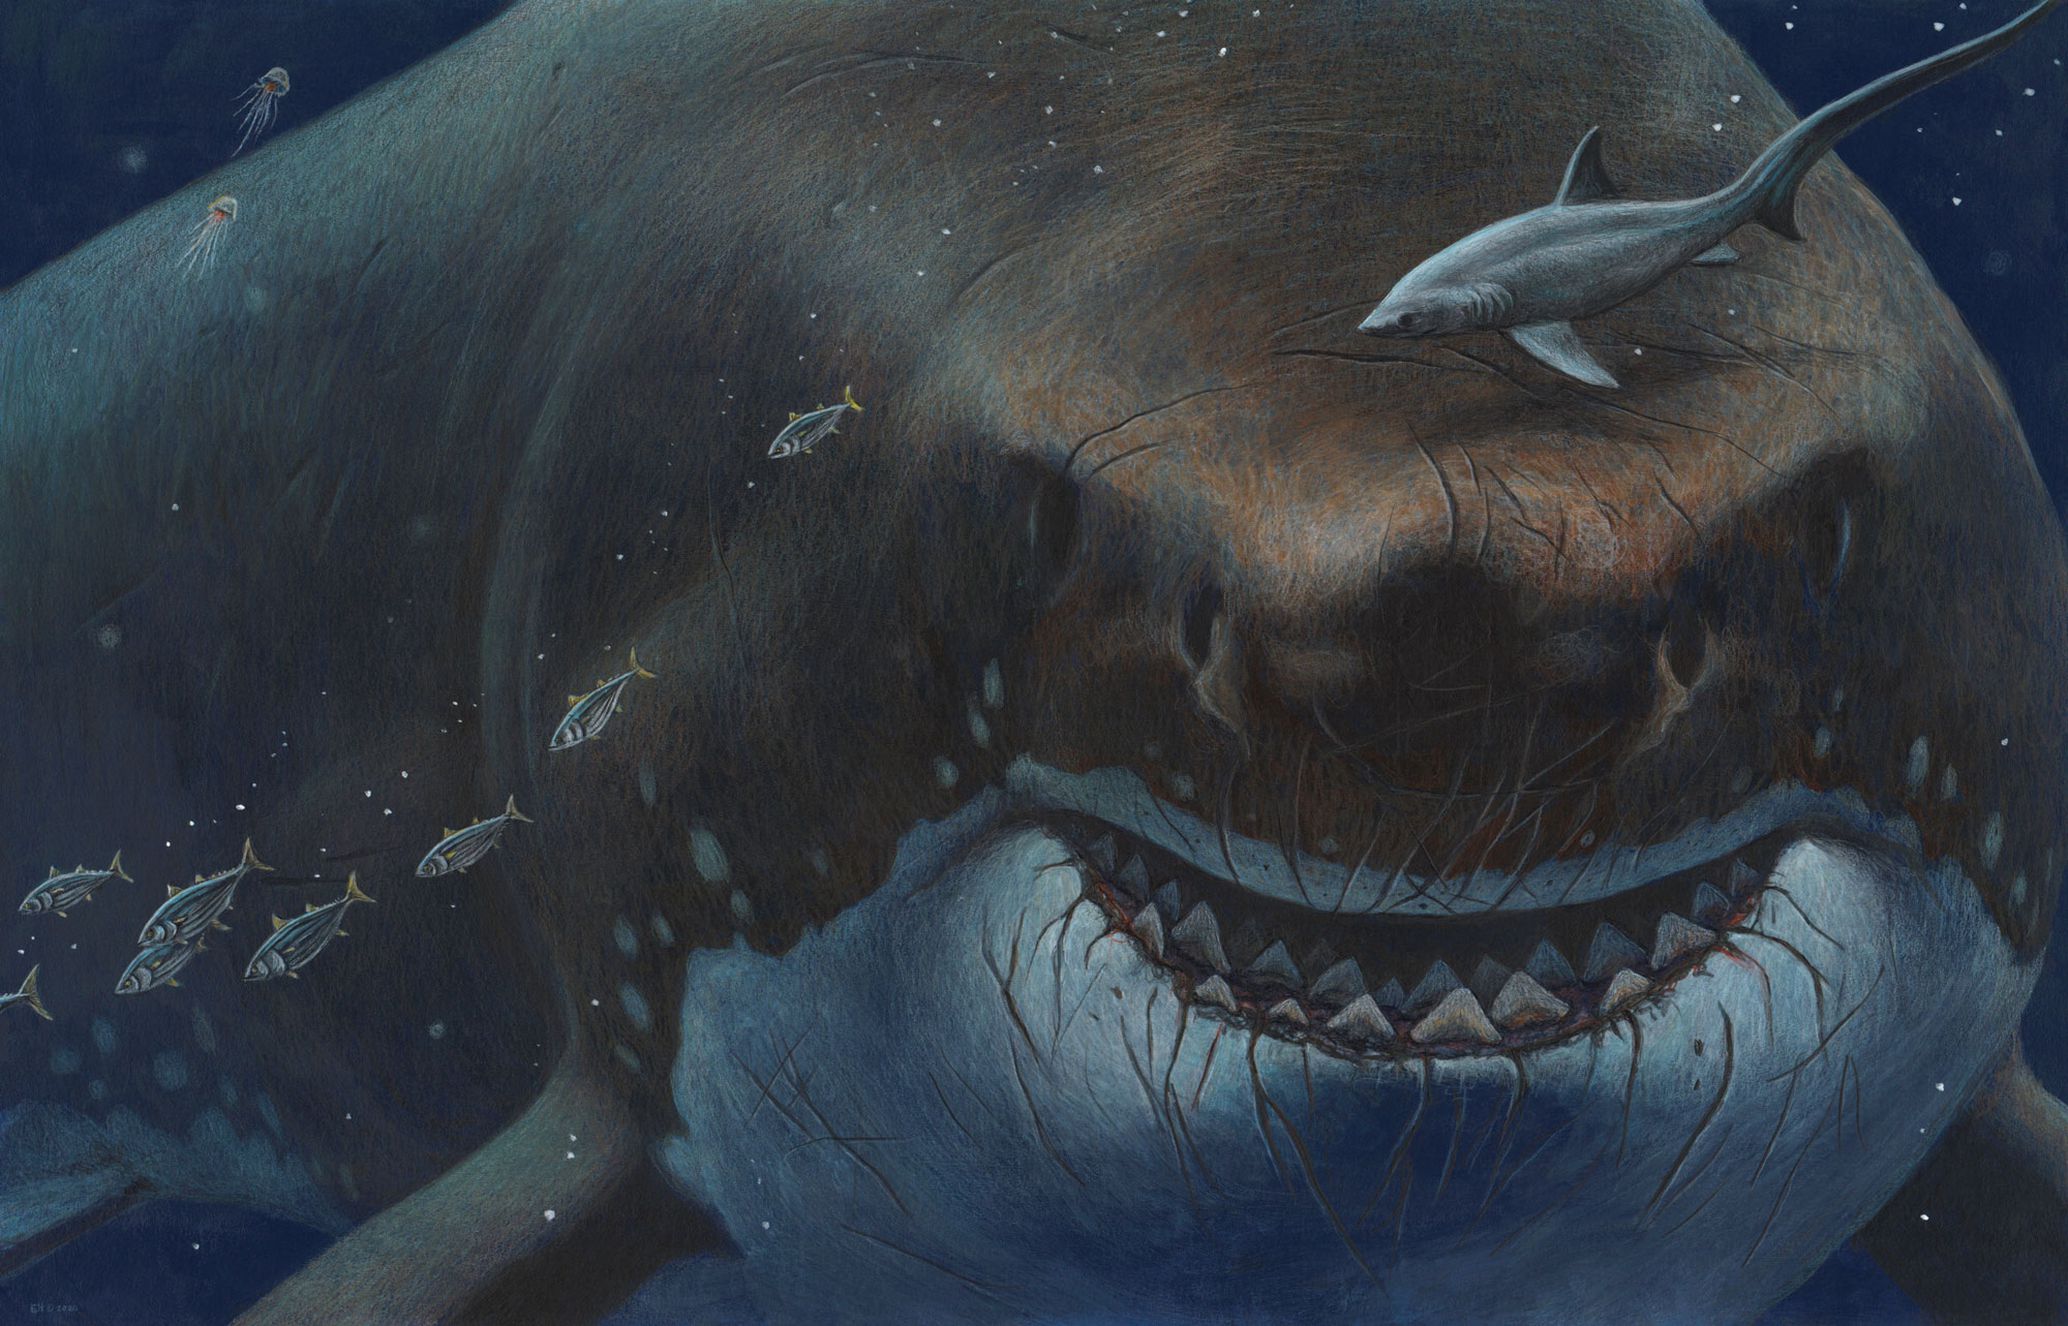 The Megalodon lived in times when humanity did not yet exist